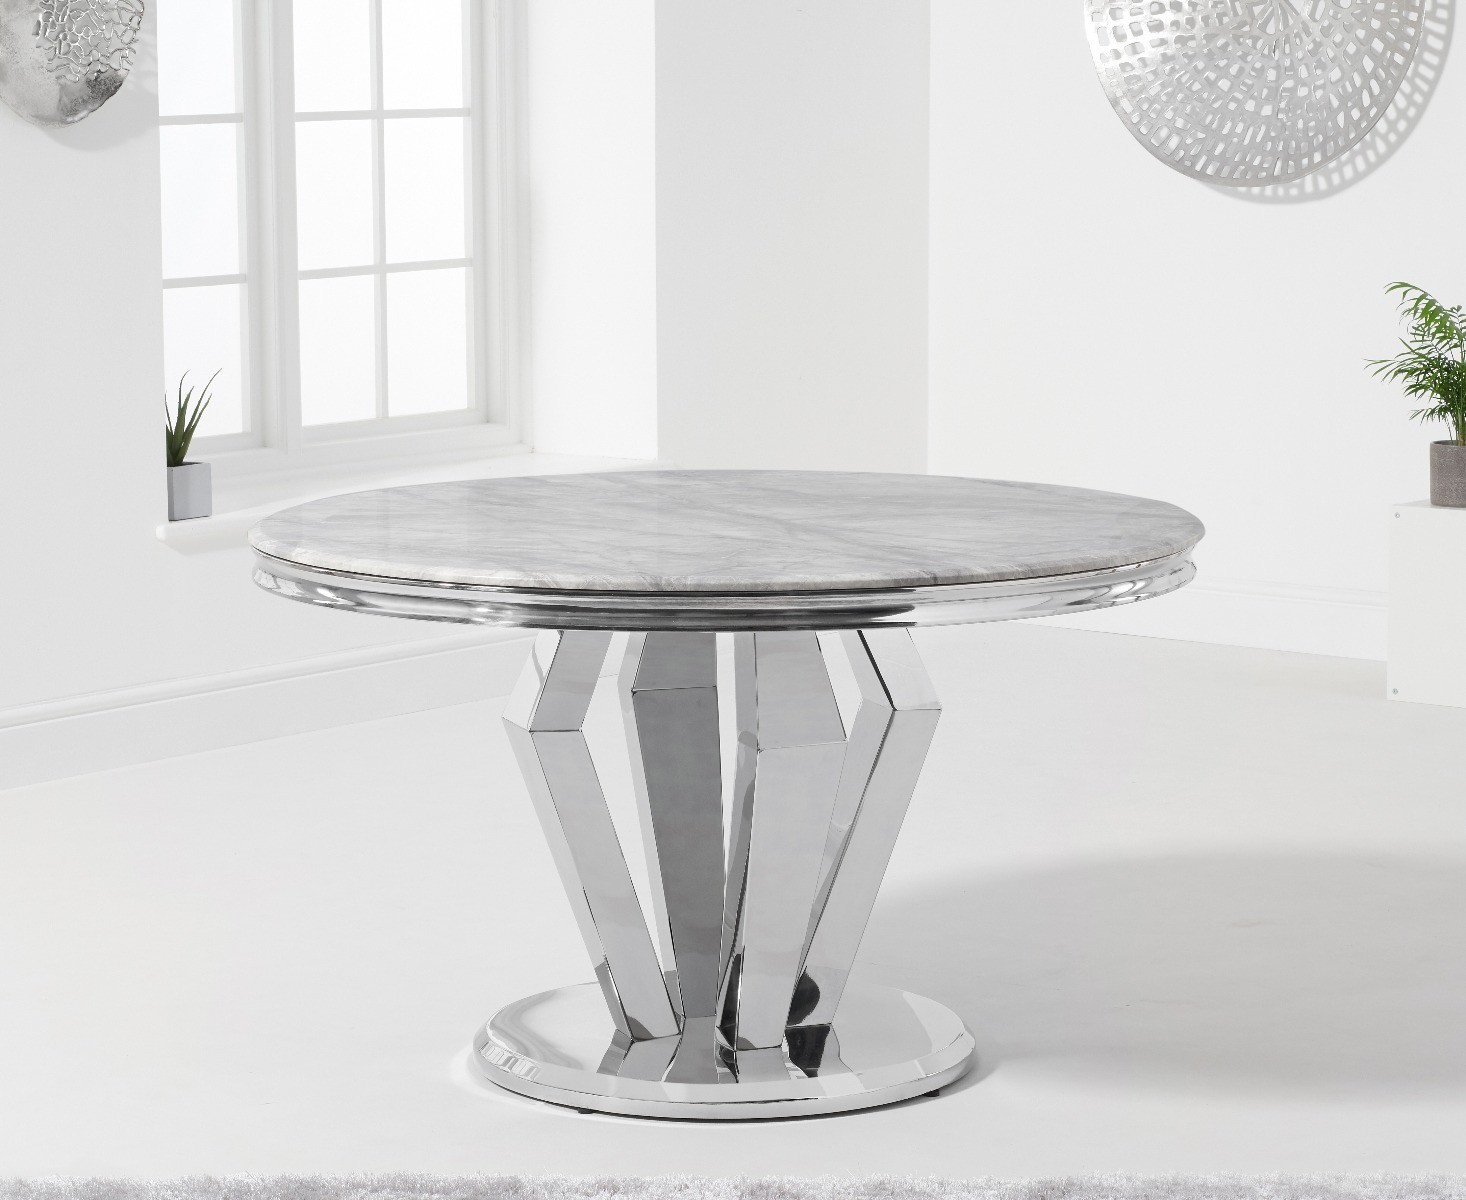 Photo 1 of Viscount 130cm round marble dining table